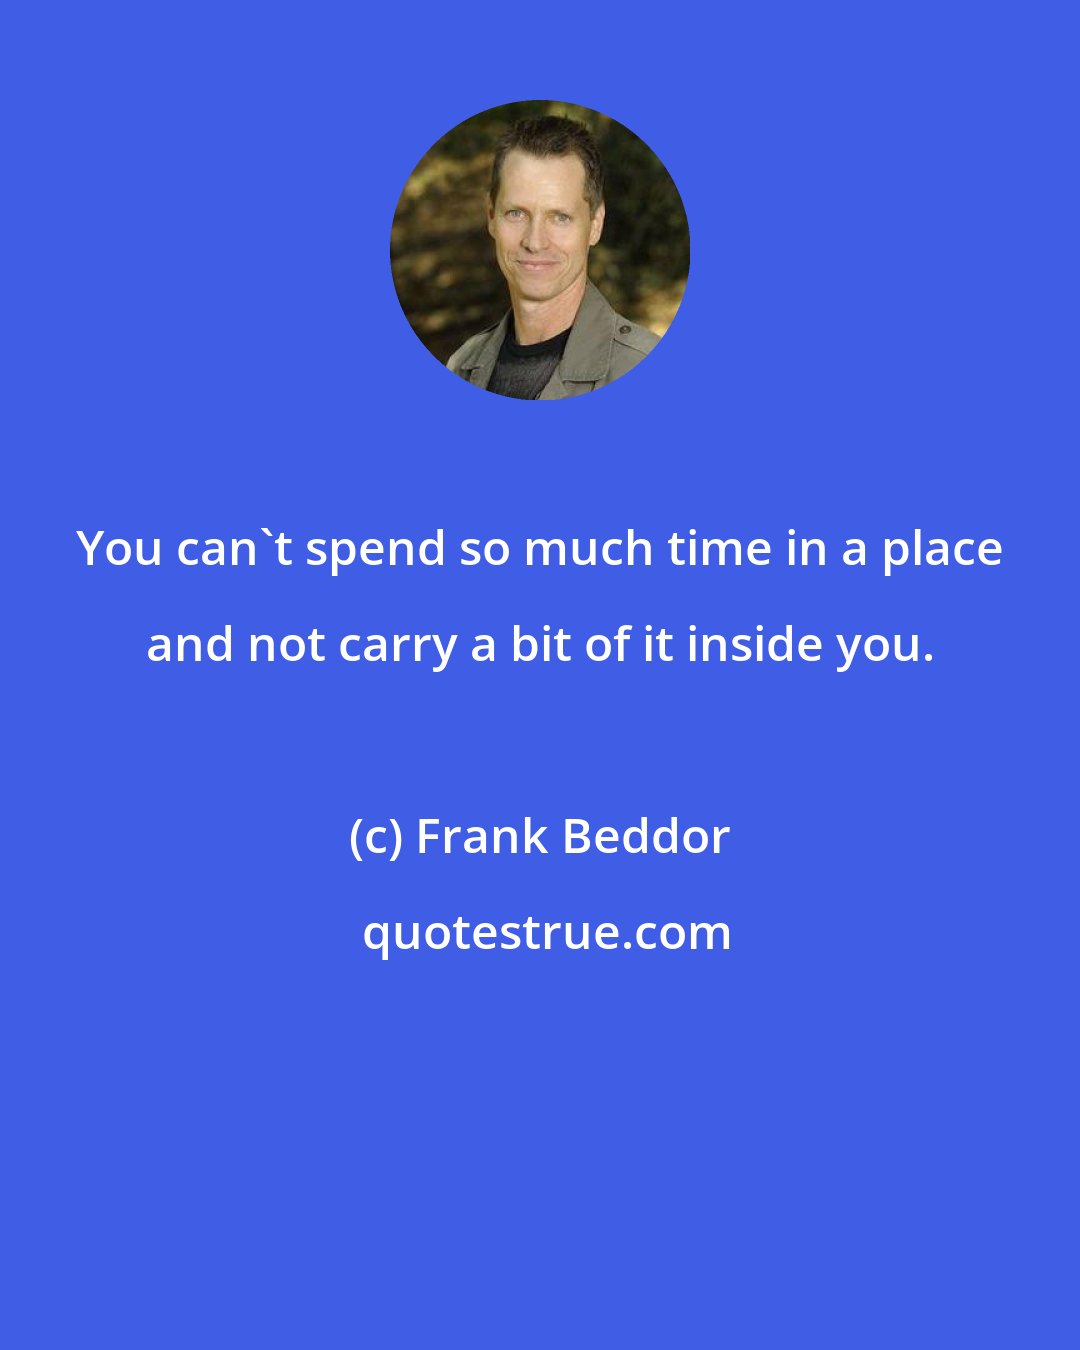 Frank Beddor: You can't spend so much time in a place and not carry a bit of it inside you.